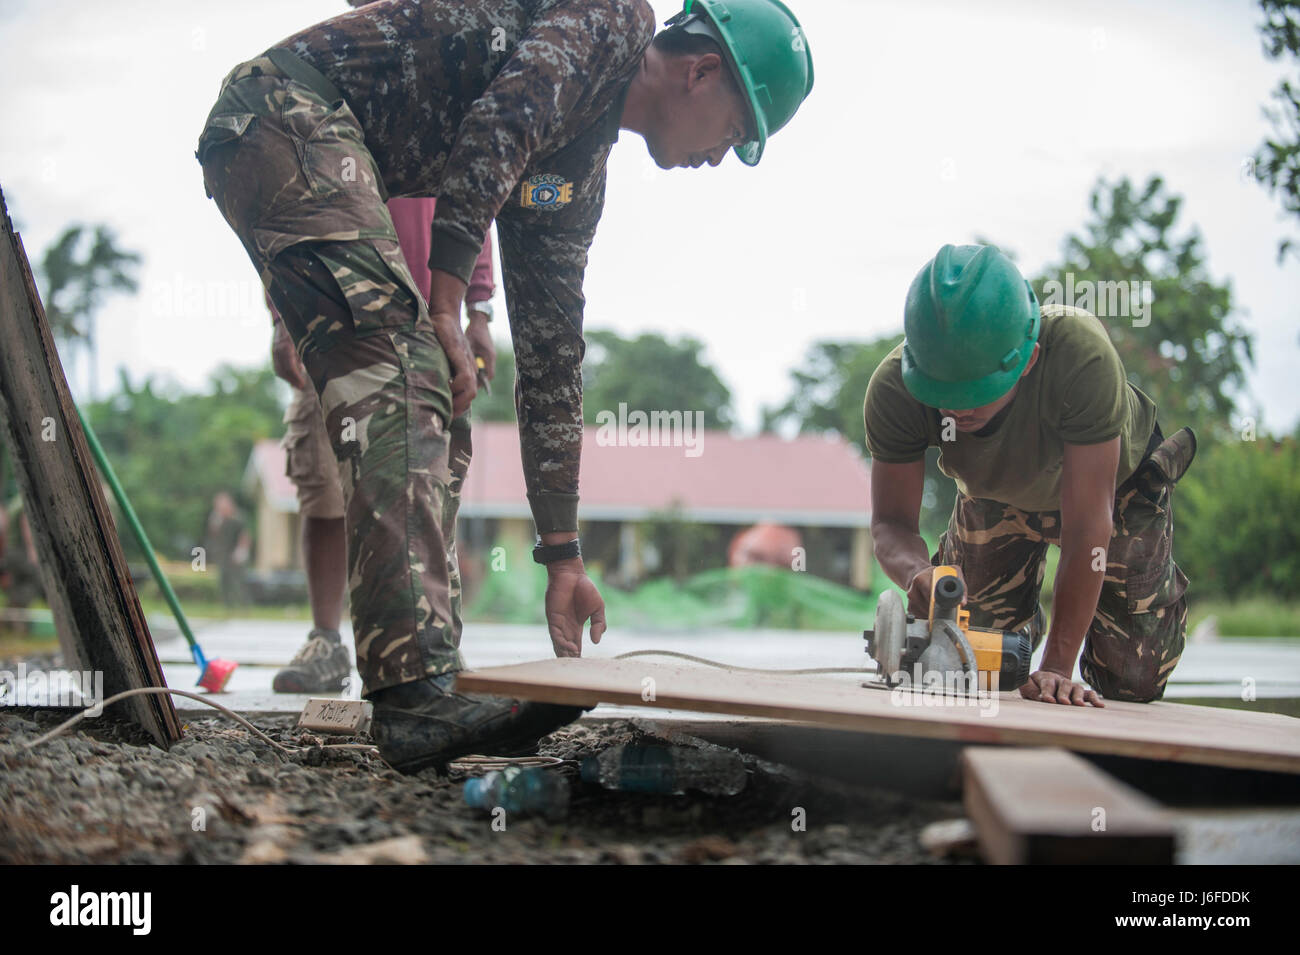 Philippine Army Cpl. Jerwin Vic Jaballa, left, and Pfc. Joel Perez cut lumber during an engineering civic assistance project in support of Balikatan 2017 in Guiuan, Eastern Samar, May 11, 2017. Armed Forces of the Philippines and U.S. military engineers worked together to build new classrooms for students at Surok Elementary School. Balikatan is an annual U.S.-Philippine bilateral military exercise focused on a variety of missions, including humanitarian assistance and disaster relief, counterterrorism, and other combined military operations. (U.S. Navy photo by Mass Communication Specialist 2 Stock Photo